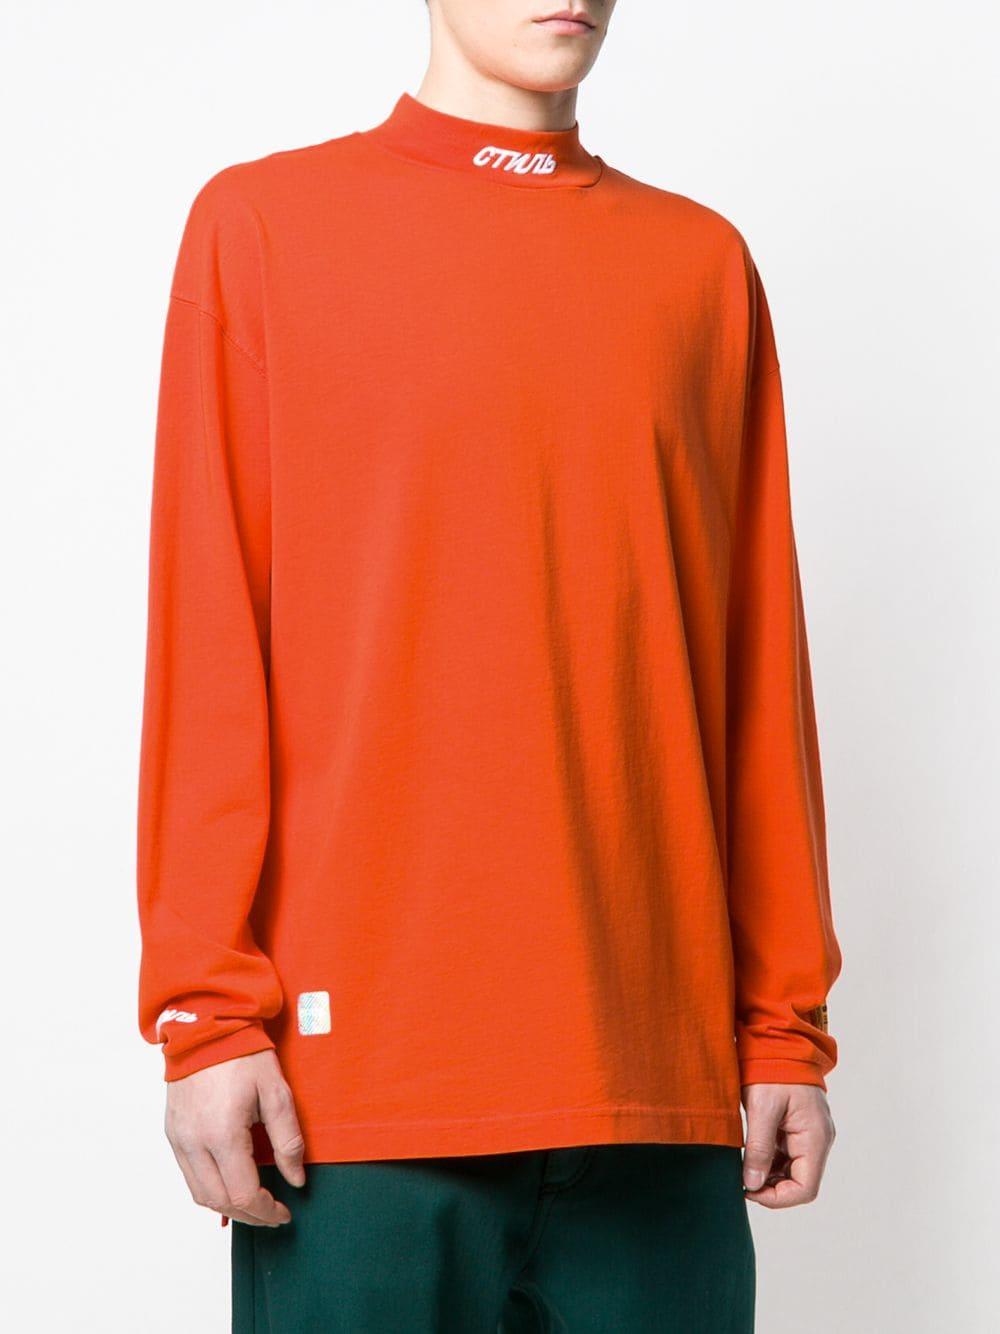 Heron Preston Cotton Loose Fit Sweater in Red for Men - Lyst